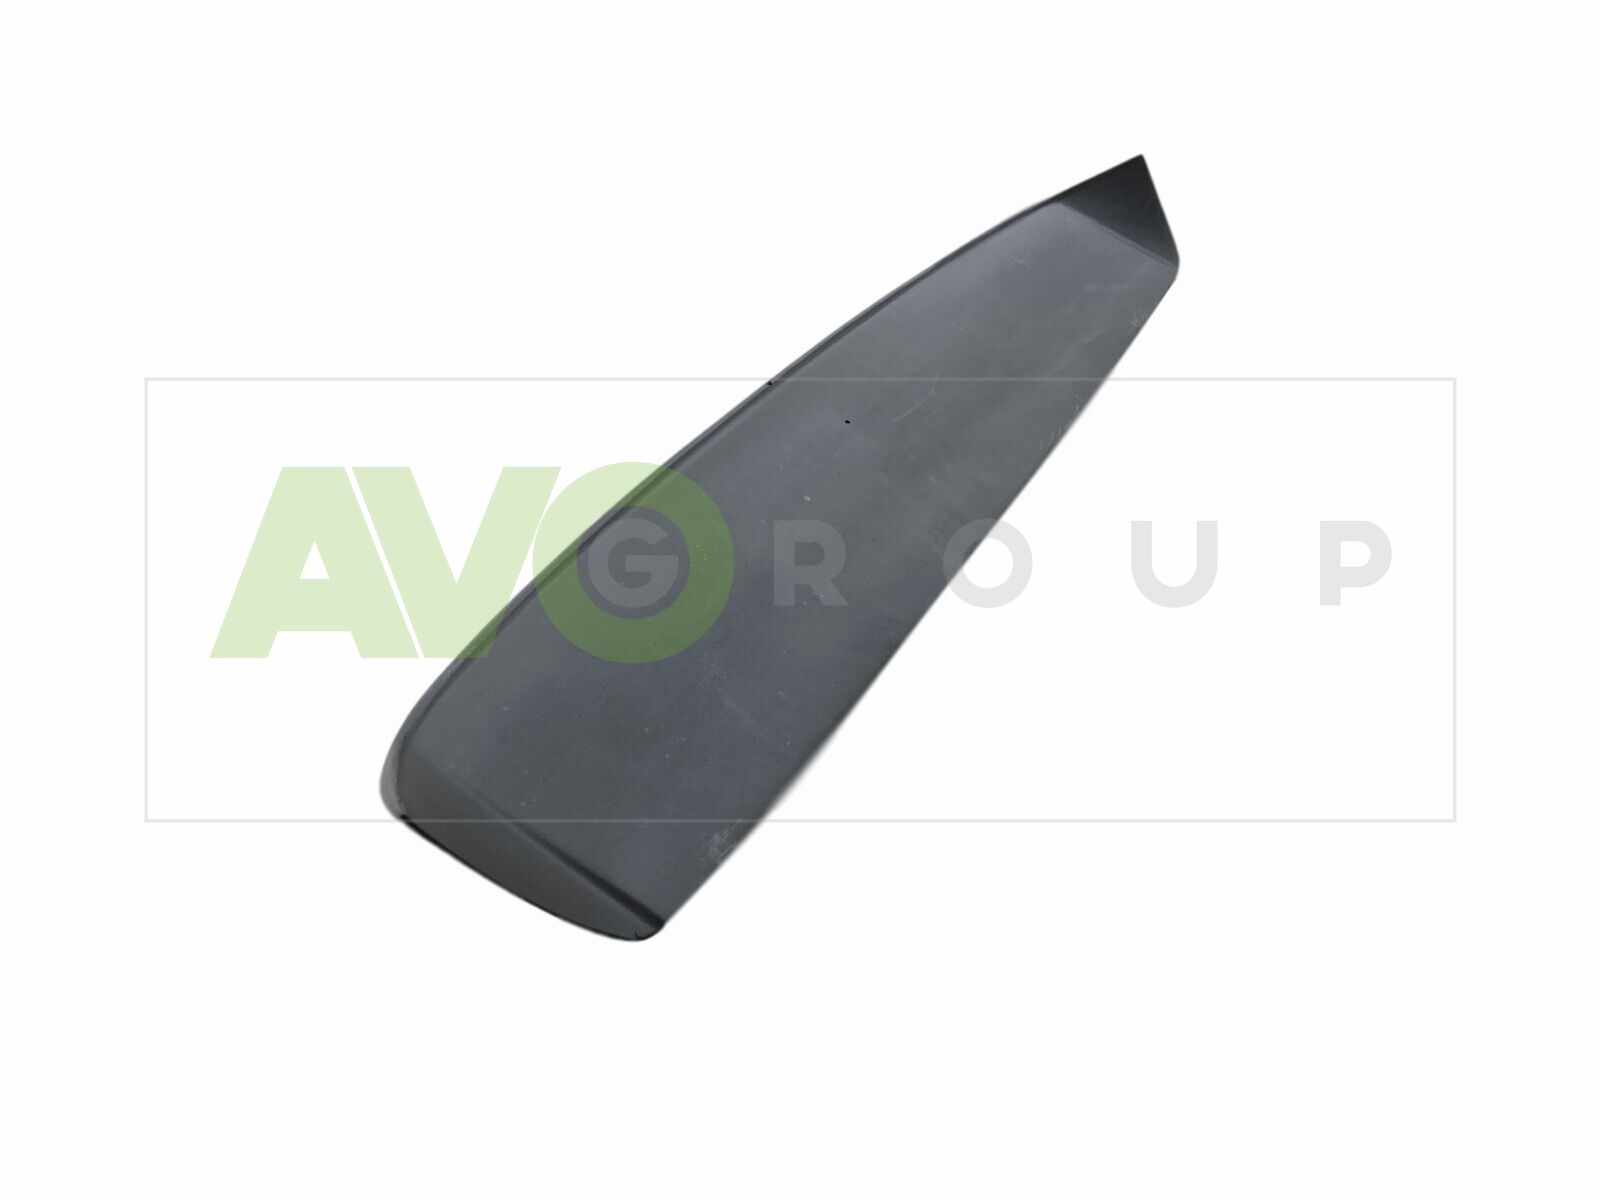 Roof Spoiler wing extension for BMW 1 E81 E87 Aerodynamic